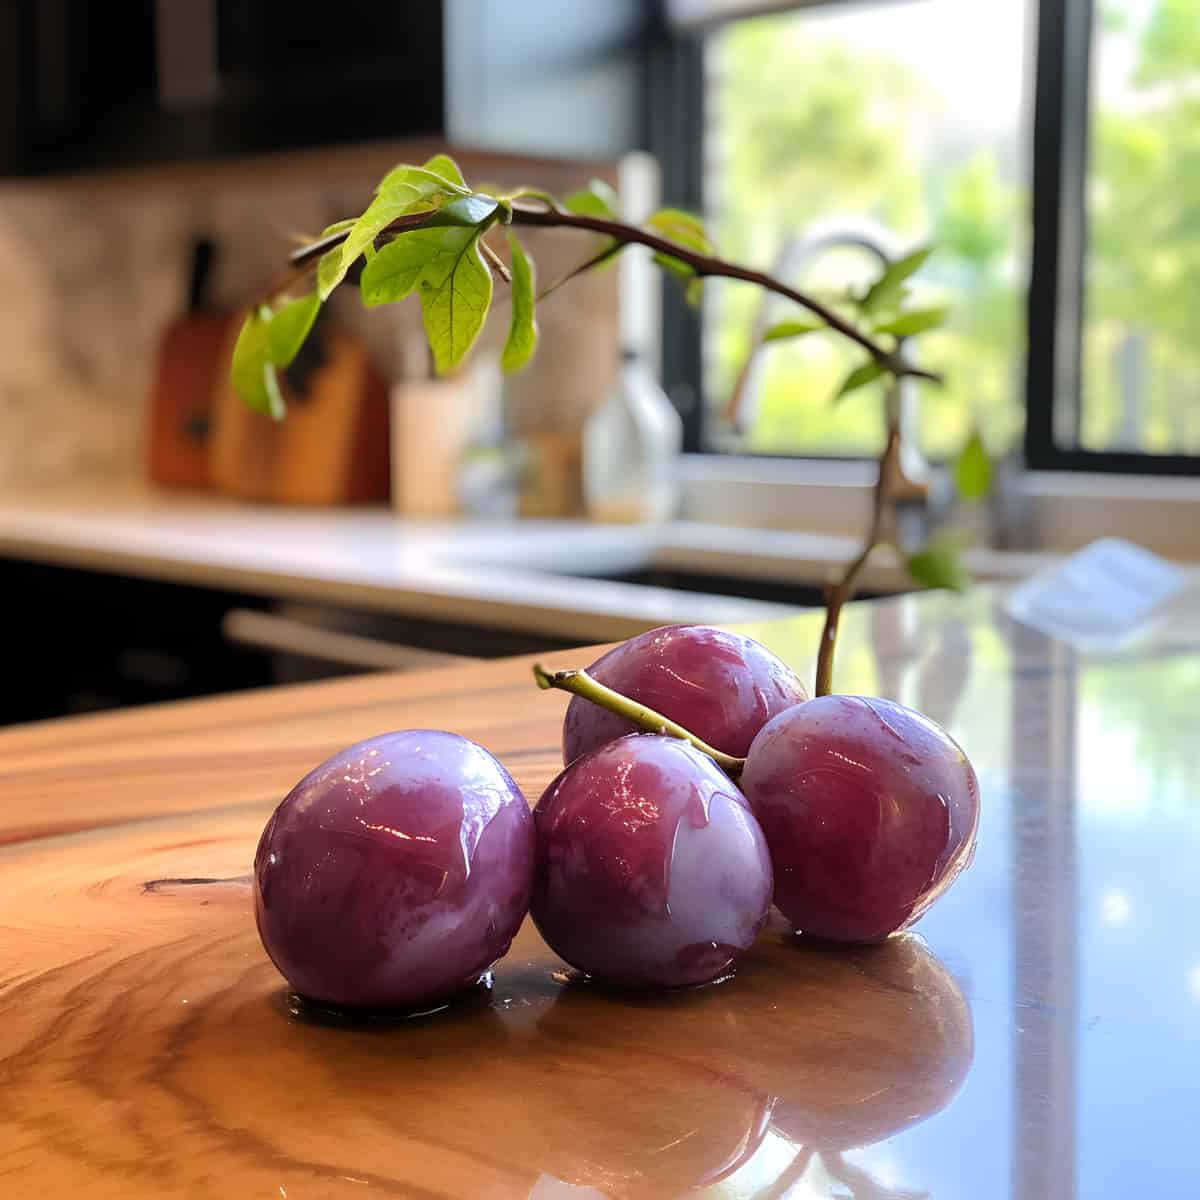 Flatwoods Plum on a kitchen counter